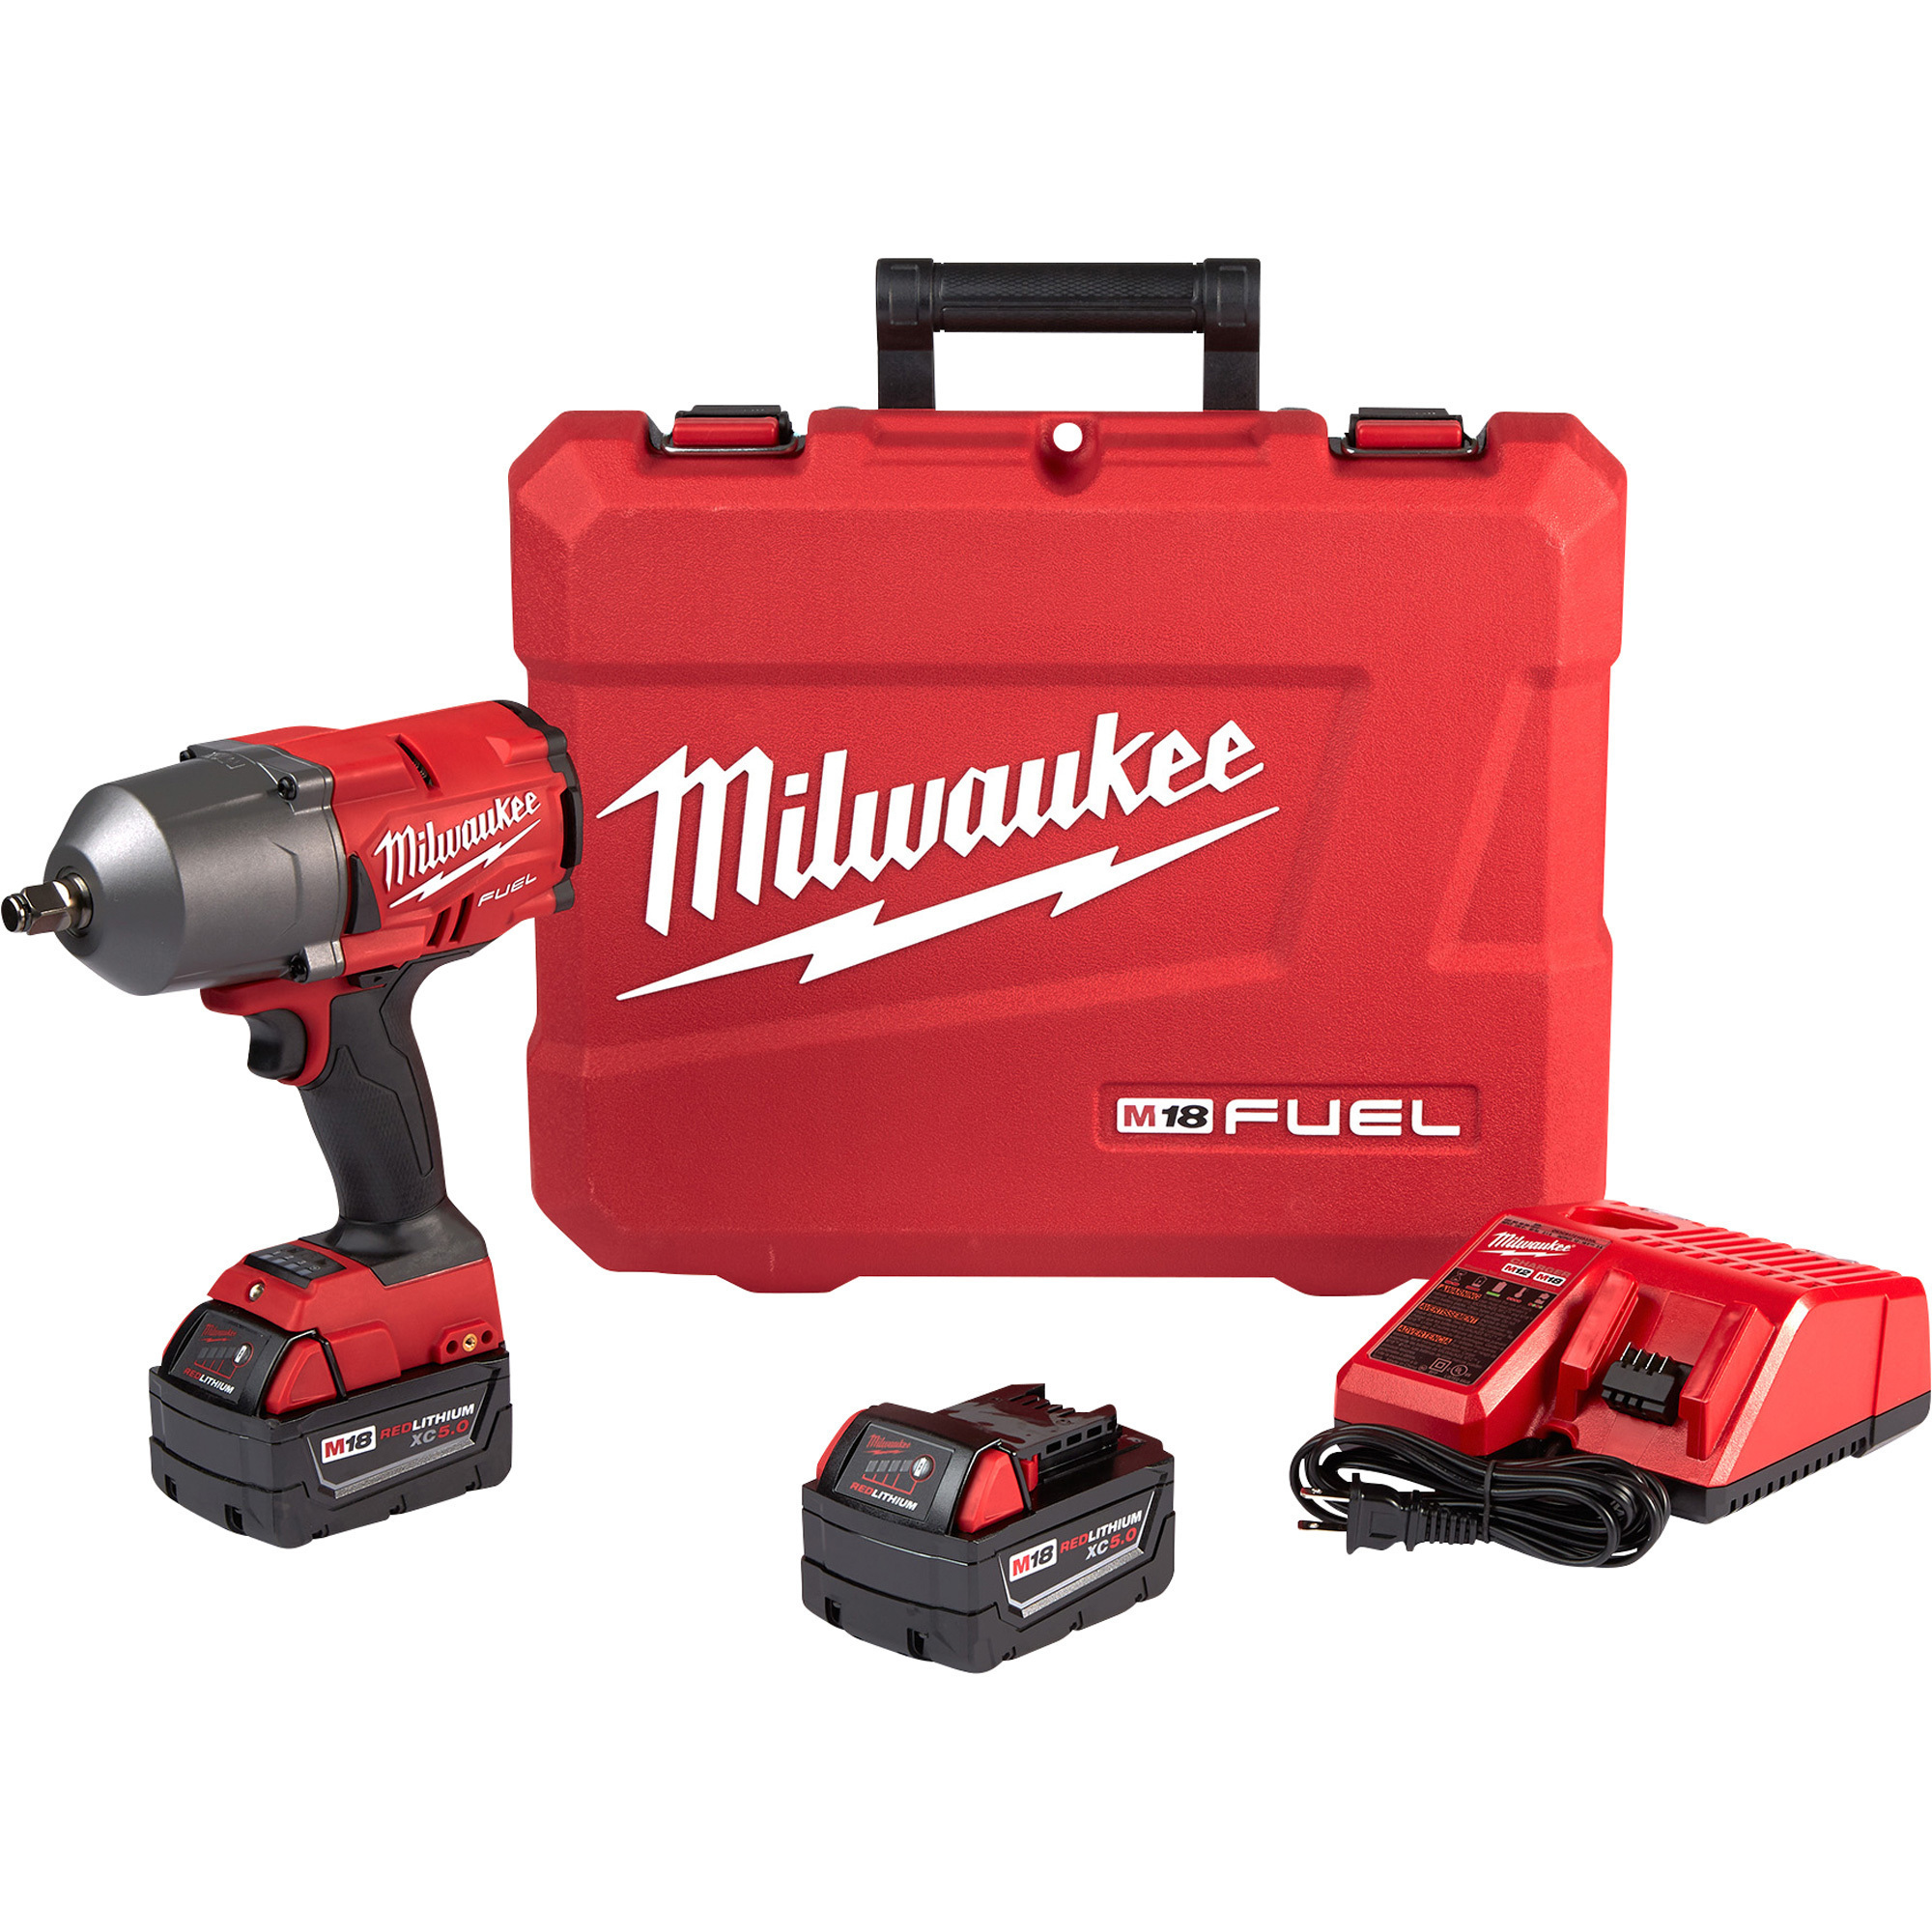 Milwaukee M18 FUEL 1/2Inch High-Torque Impact Wrench with Friction Ring Kit, Model 2767-22R